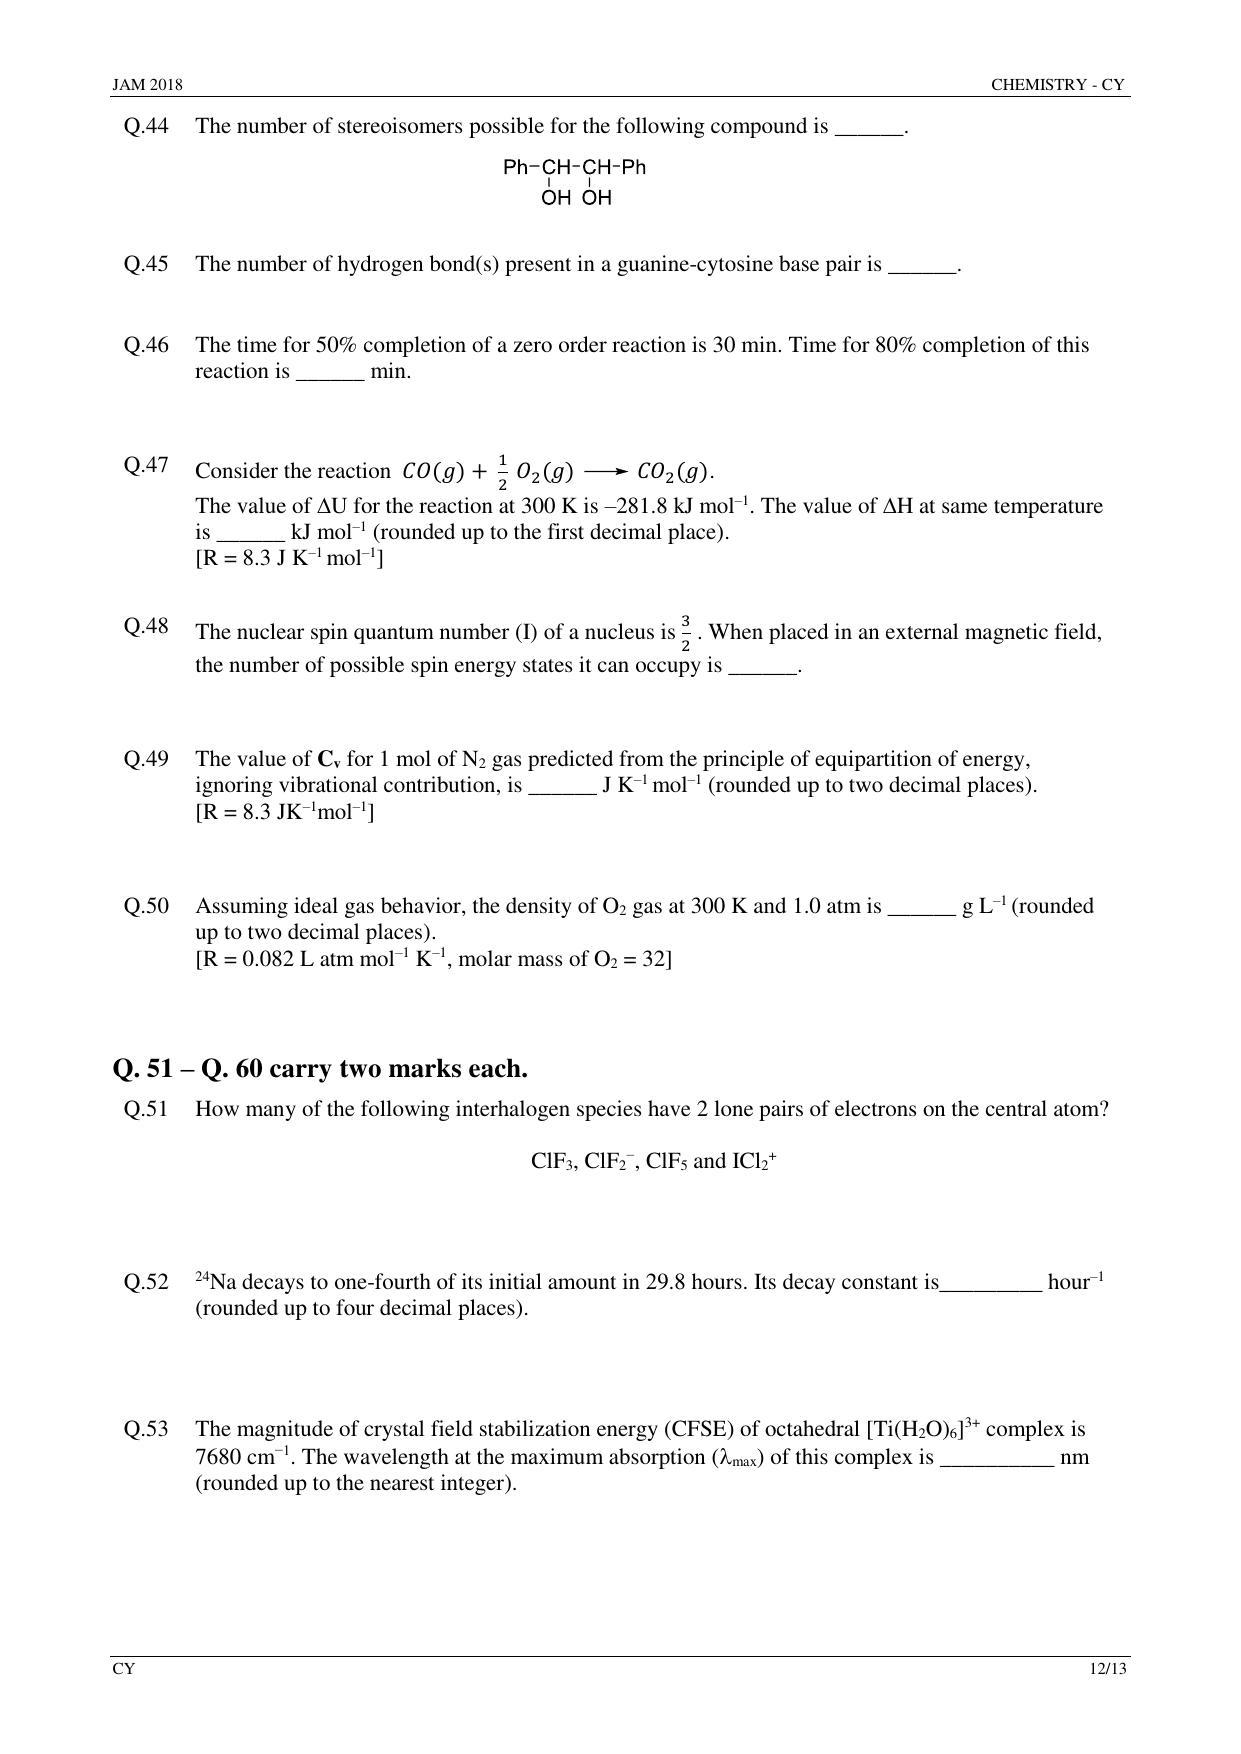 JAM 2018: CY Question Paper - Page 12